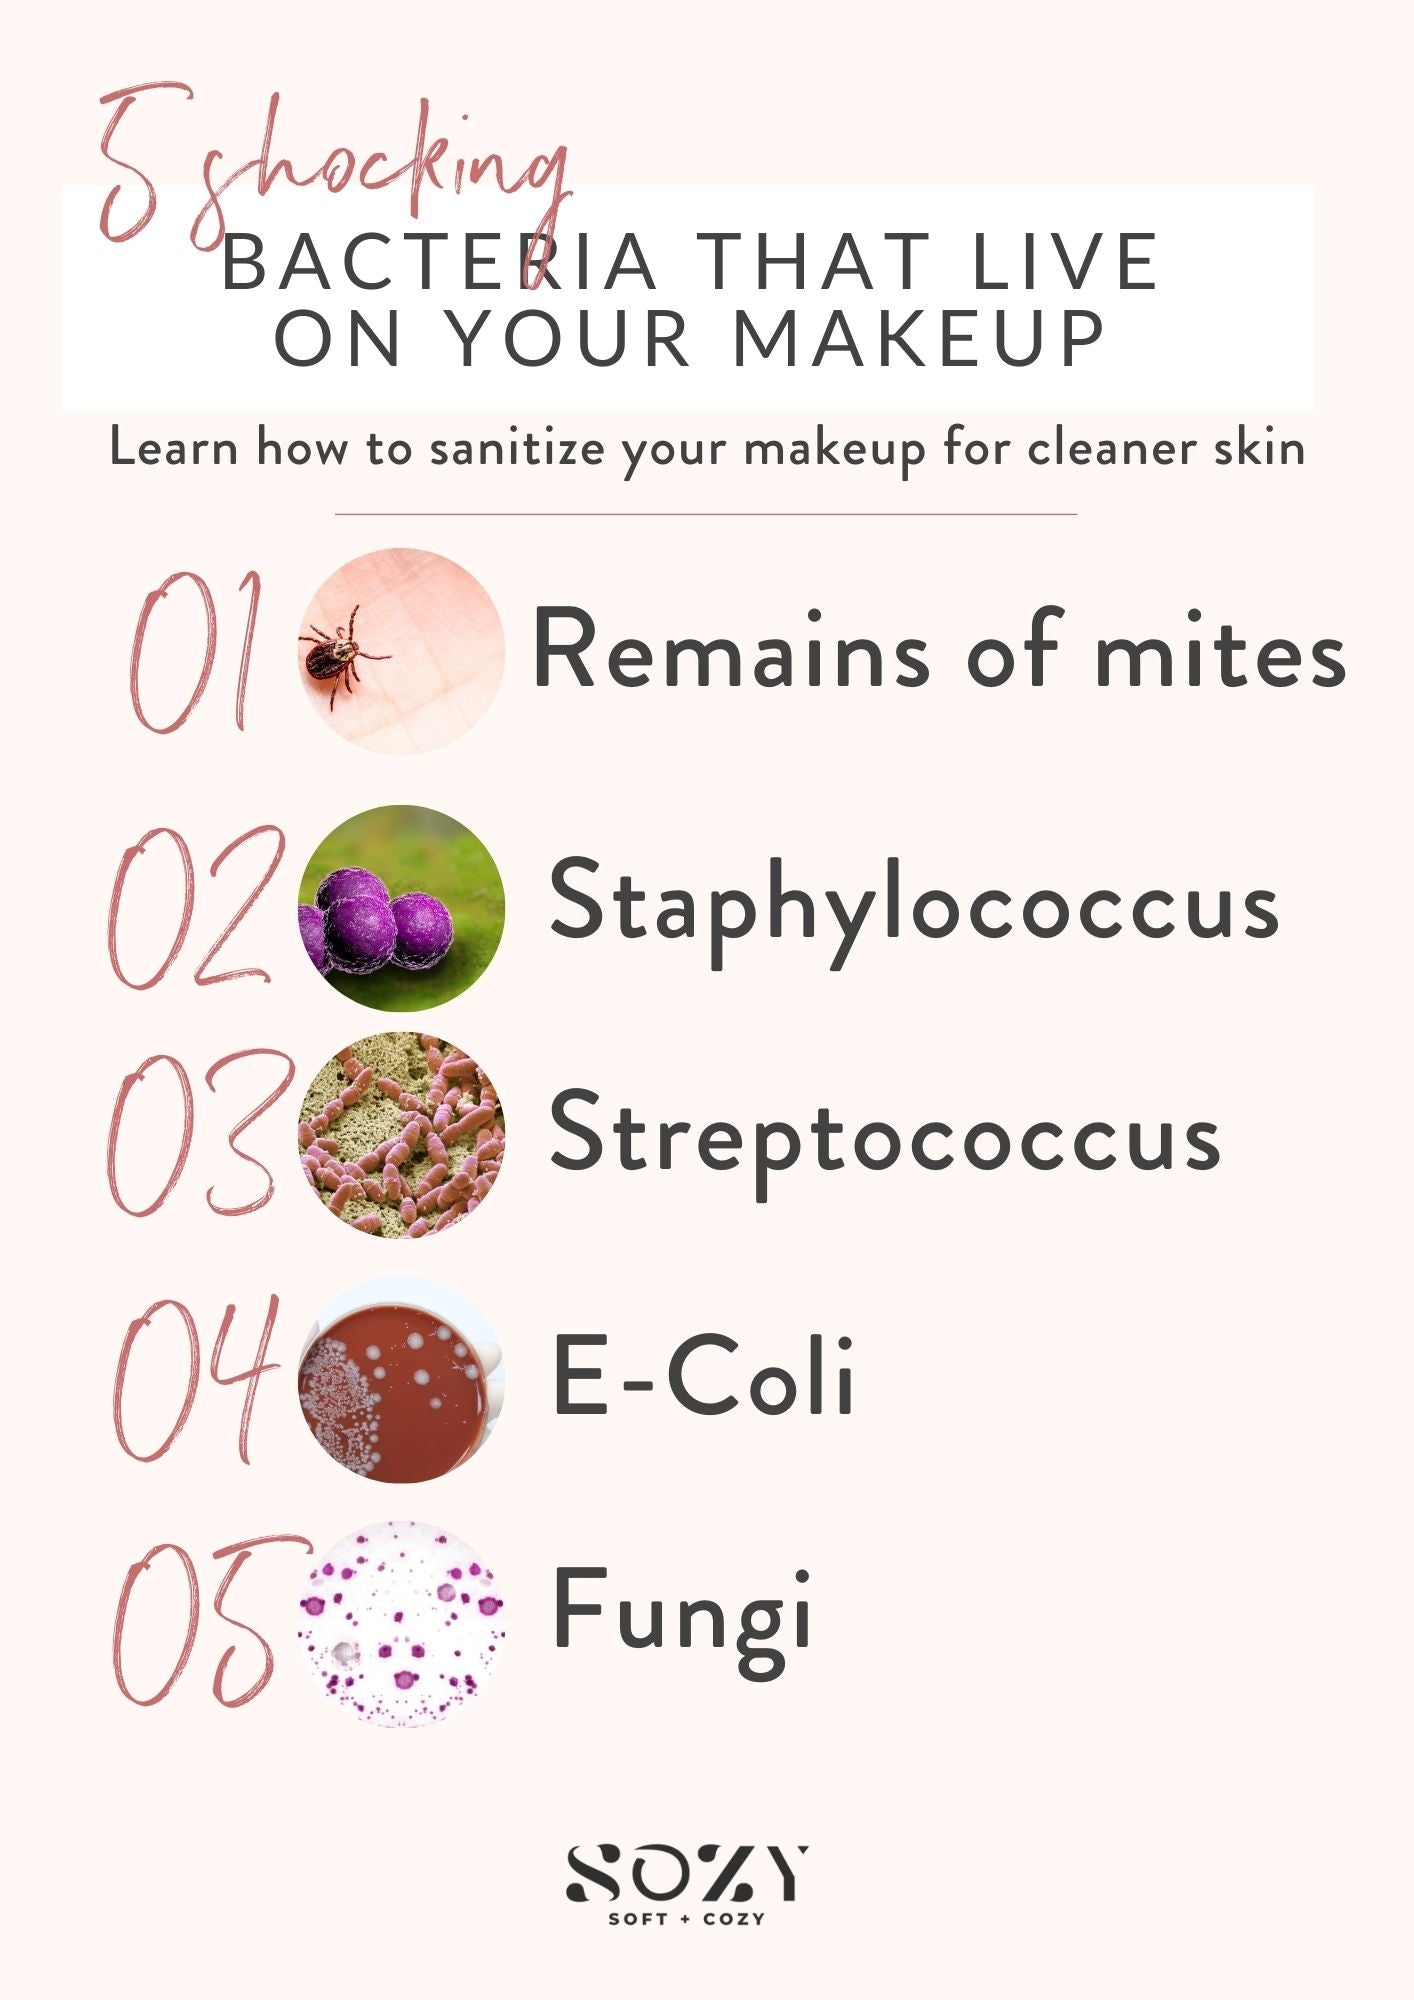 common bacteria found in makeup